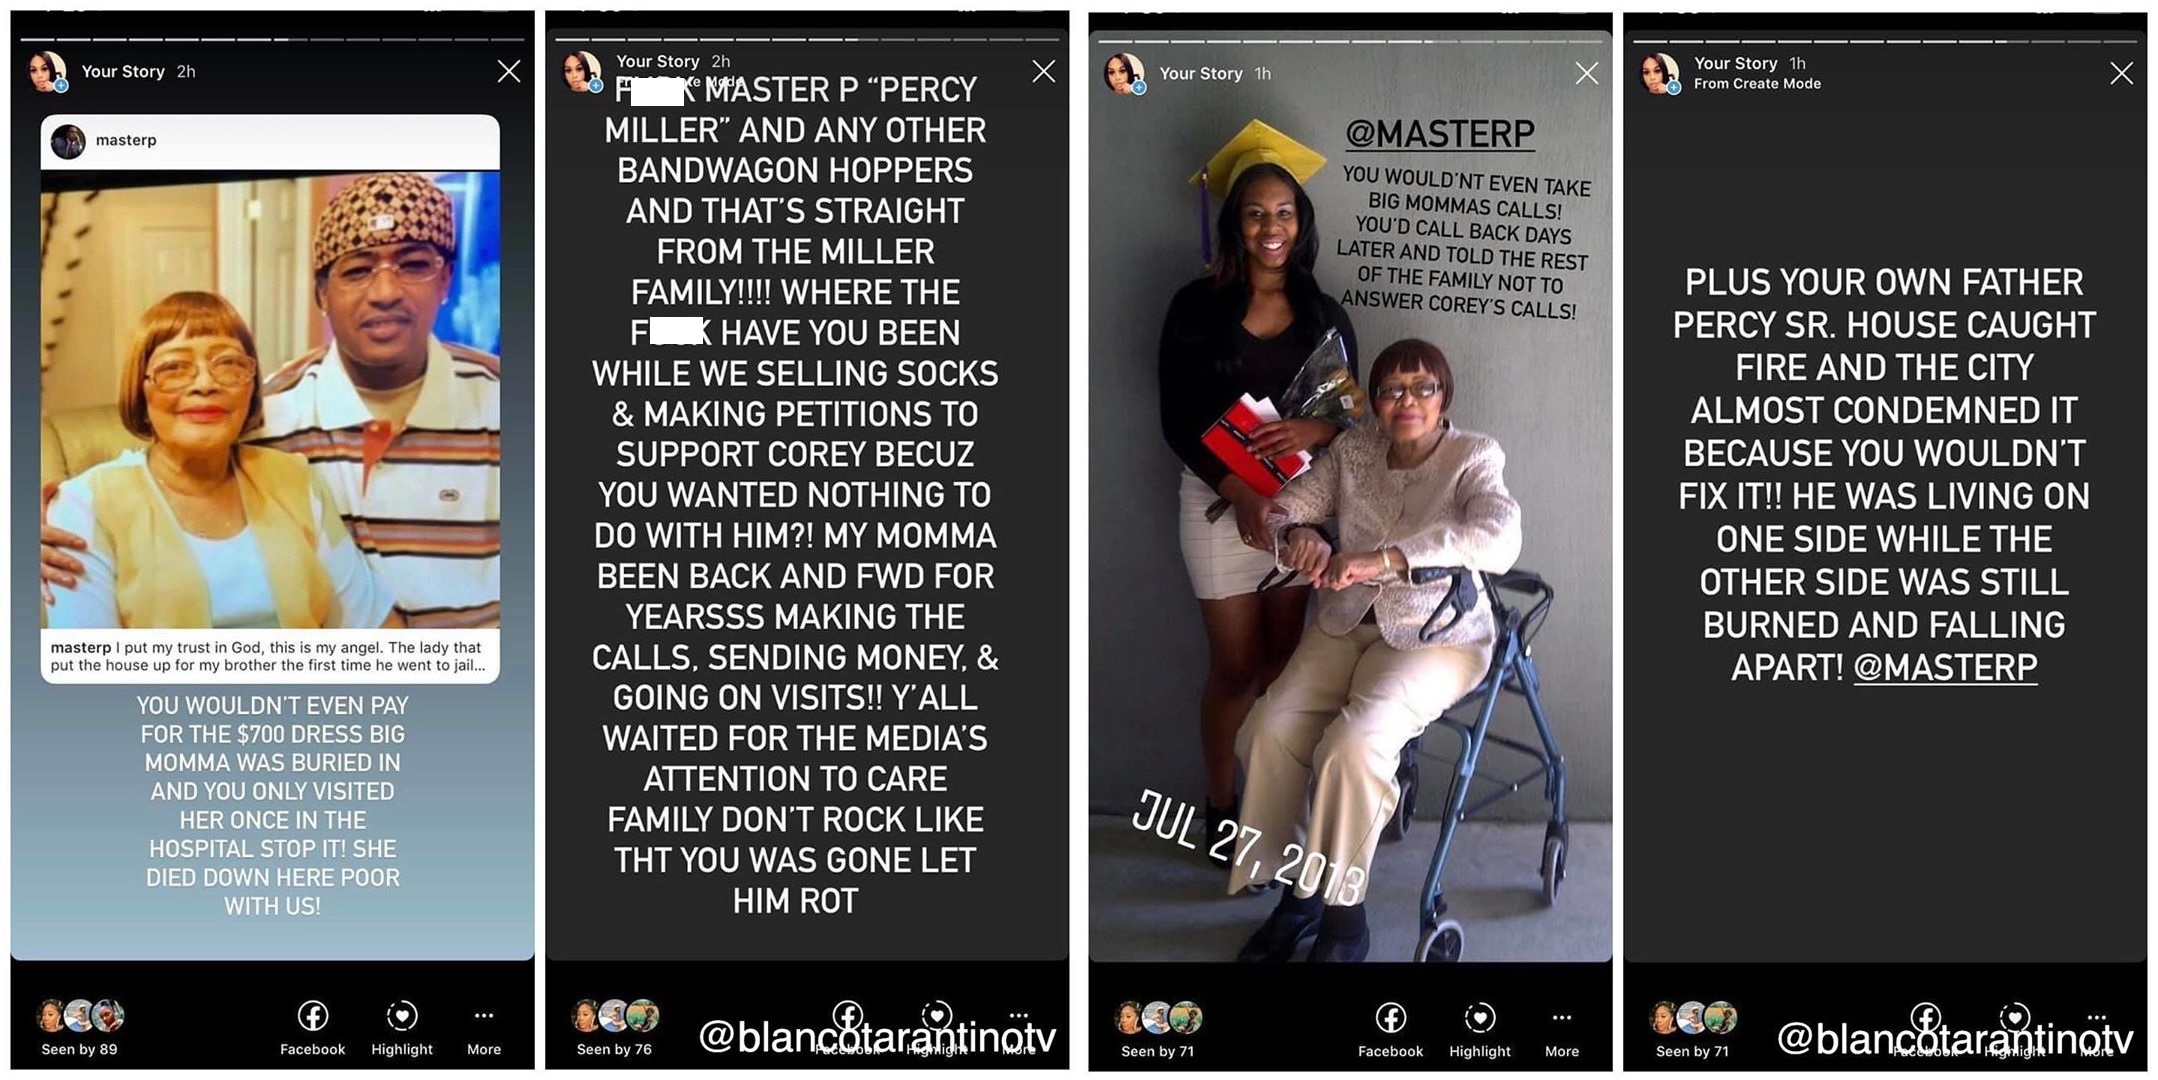 Master P has recently been embroiled in controversy, due to him speaking publicly out at C-Murder, saying P didn't do enough to get him out of prison. First, Master P and Monica got into it, before P apologized for bringing her into the family drama, but then a family member came at P, accusing him of lying about being there for his grandmother and grandfather, not giving money to the family, ignoring them, and not going to see C, like he said he did. After seeing this, Master P revealed he is done with his family, saying his ATM is cut off, and now they need to get a job, as he's done enabling ungrateful people.